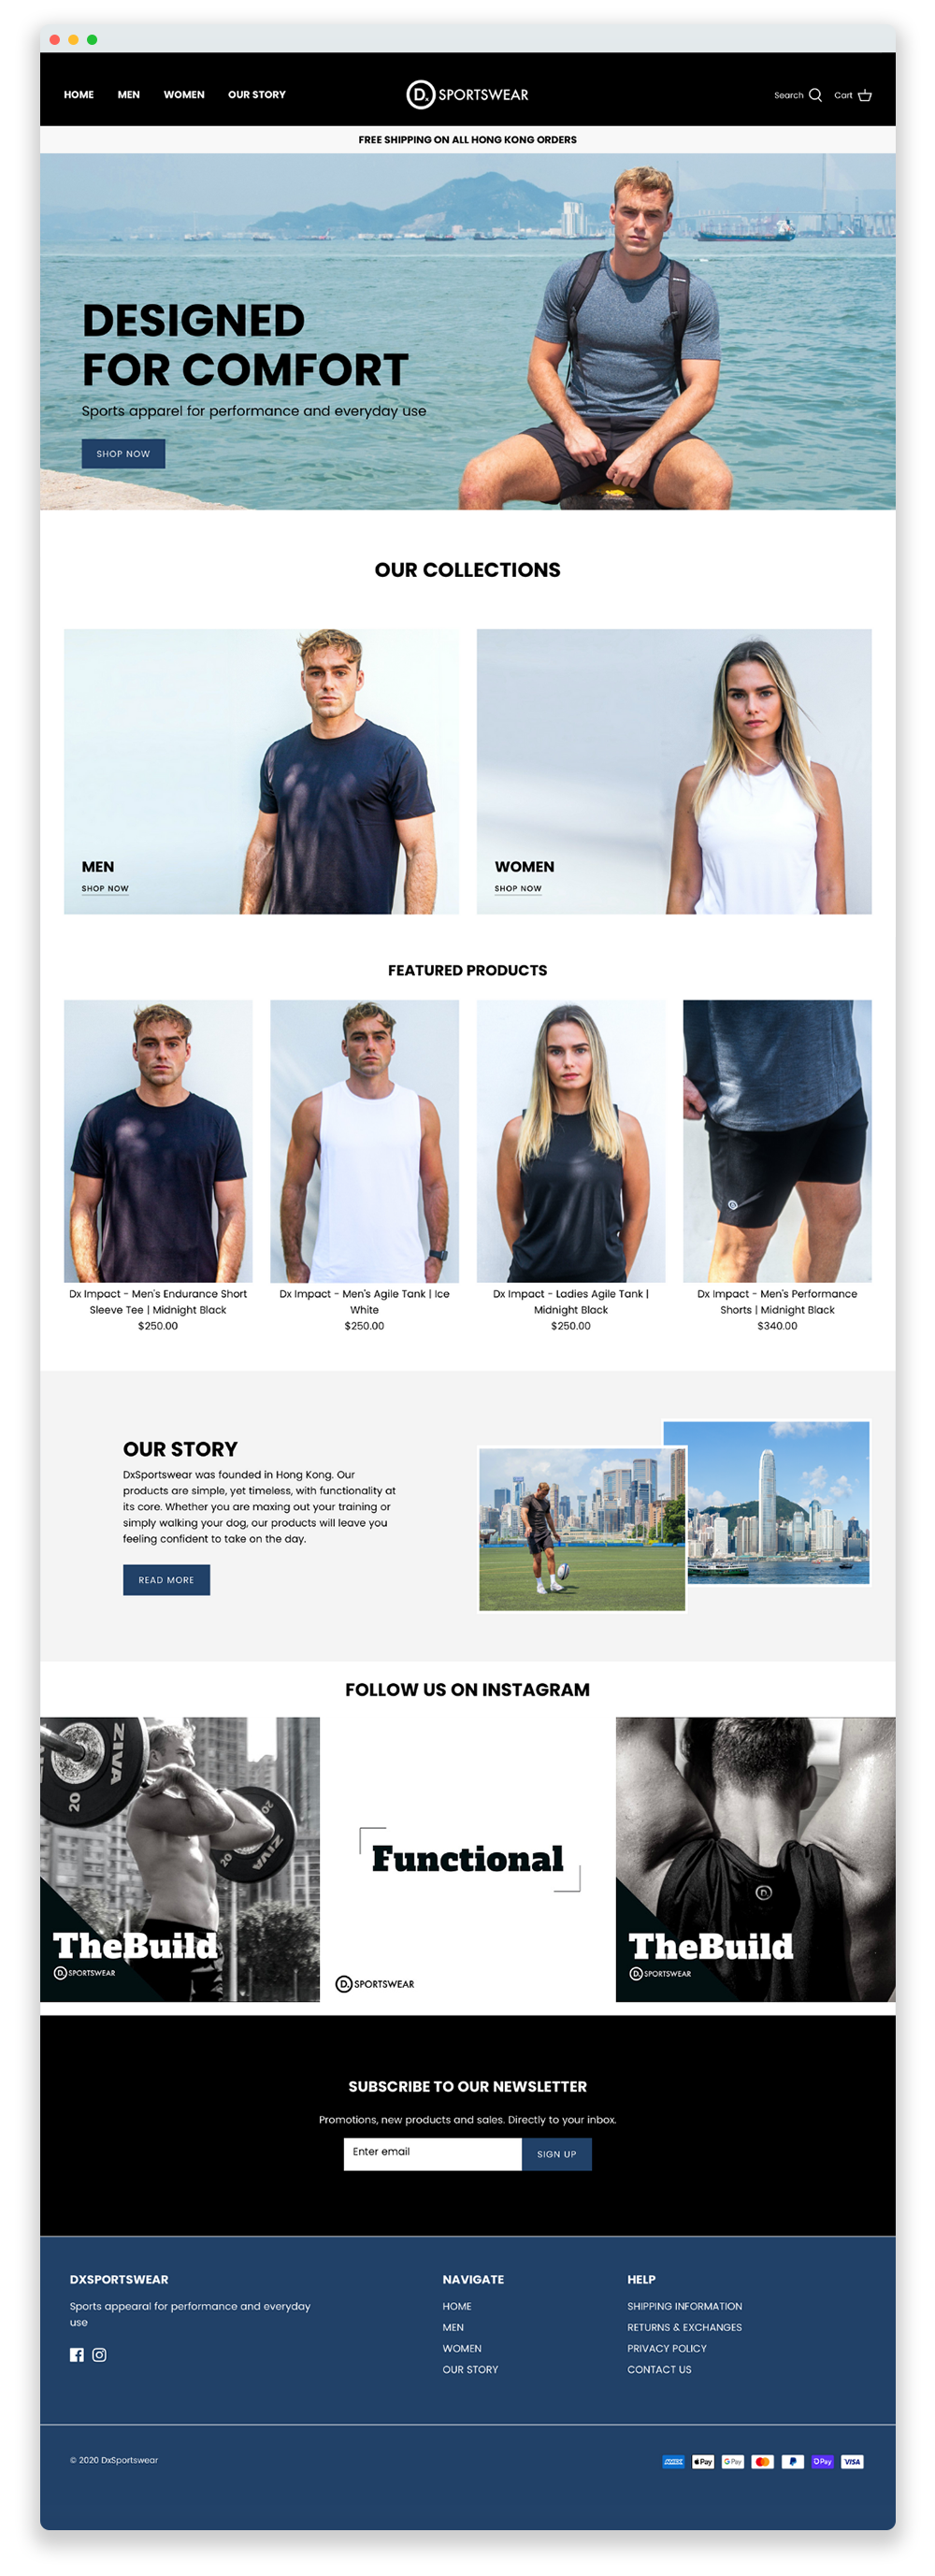 E-Commerce Website Design Service in Hong Kong for Activewear and Sports Apparel Brand, Dxsportswear by Web Designer Kyra Janelle - Desktop Homepage.